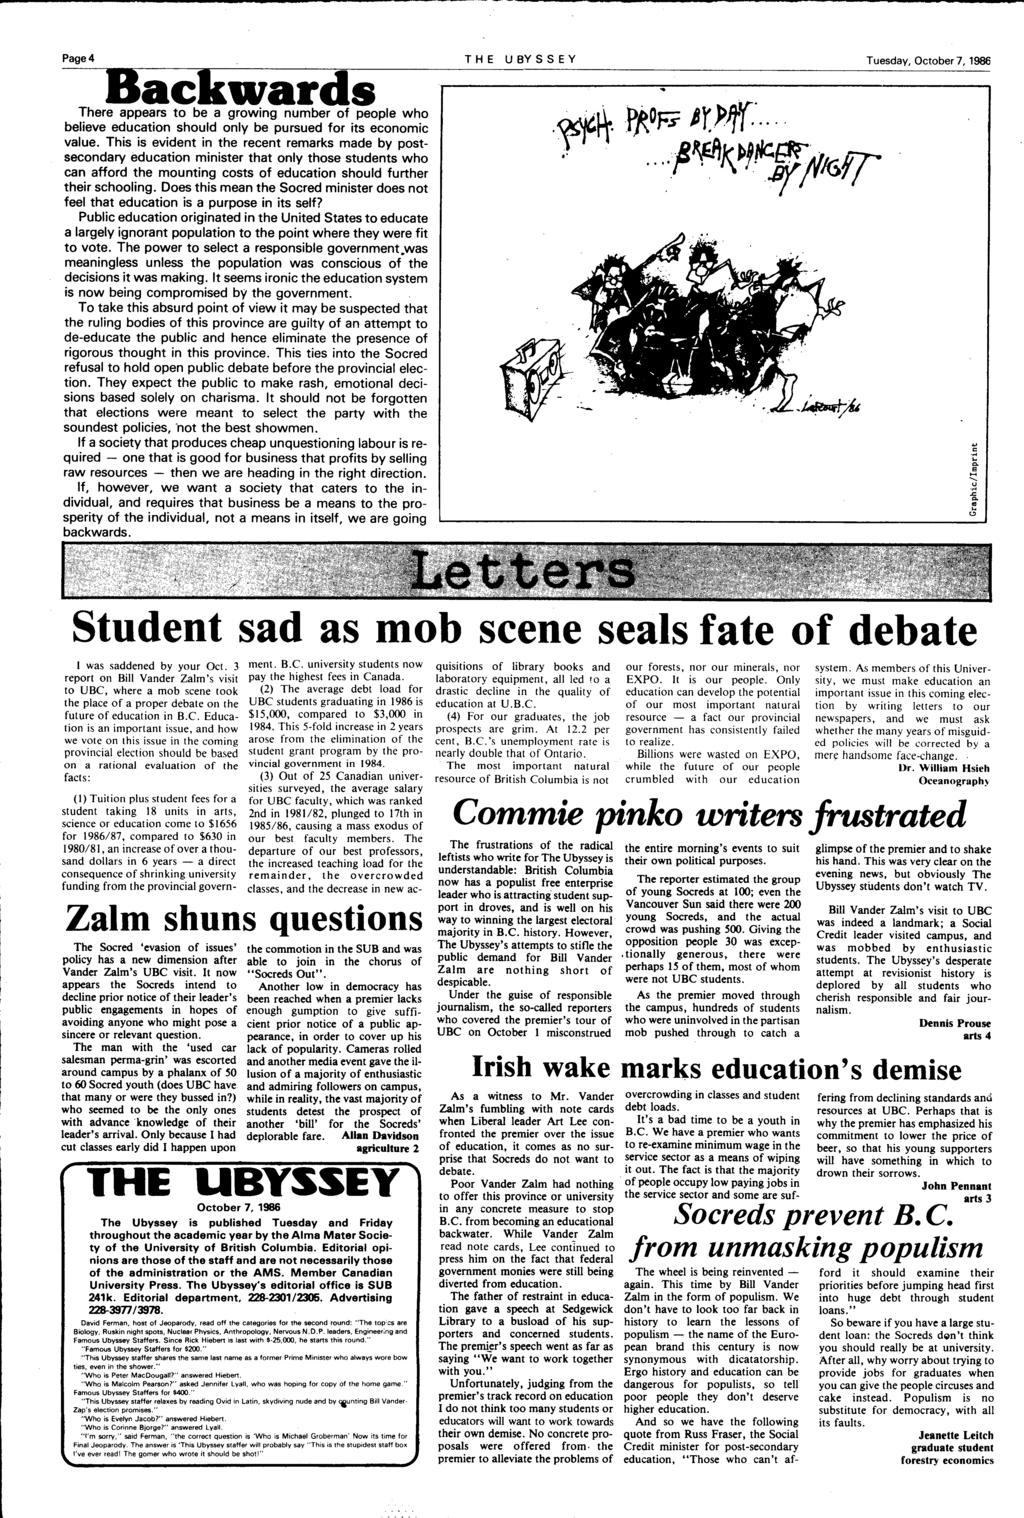 Page 4 THE UBYSSEY October Tuesday, 7, 1986 There appears to be a growingnumber of people who believe education should only be pursued for its economic value.